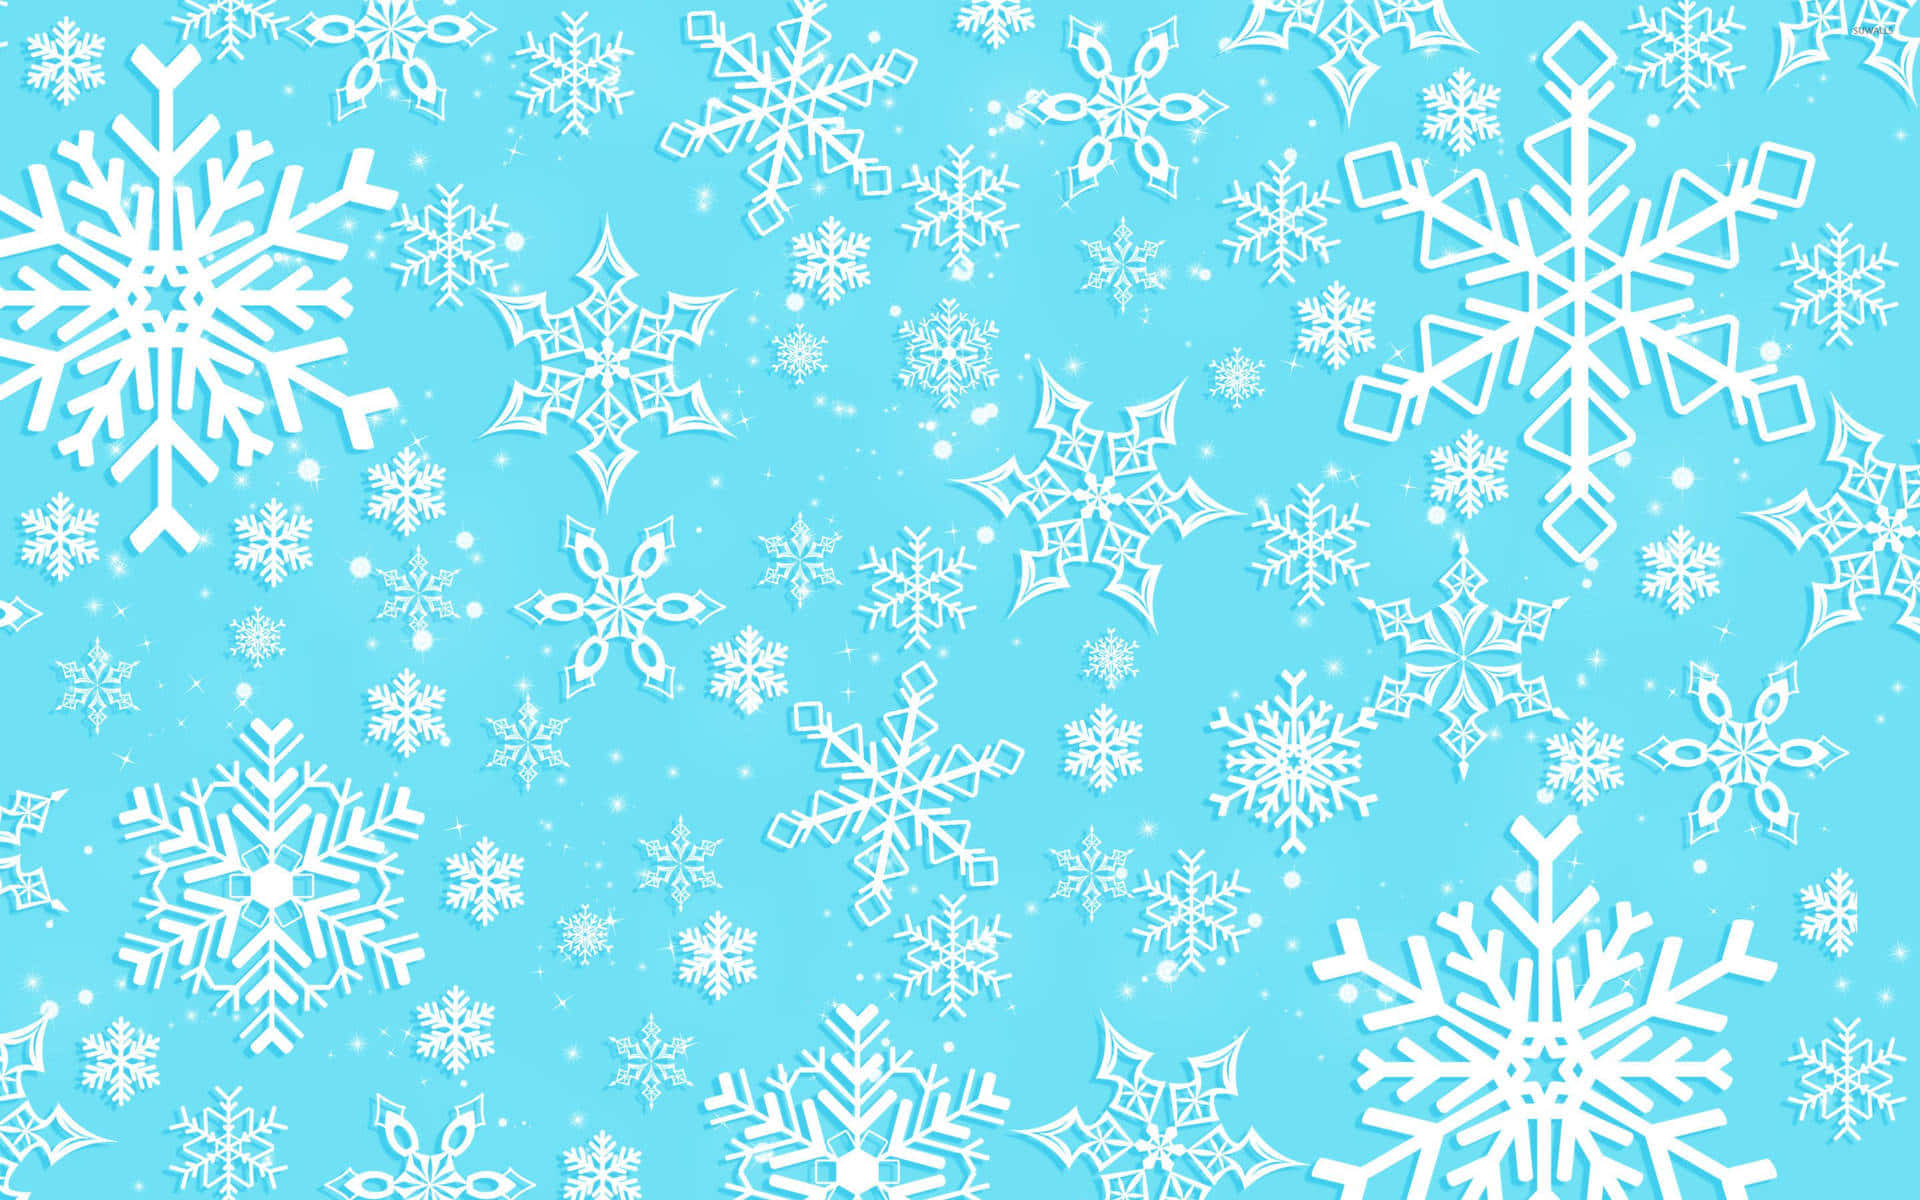 Magnificent White Snowflakes Background Design